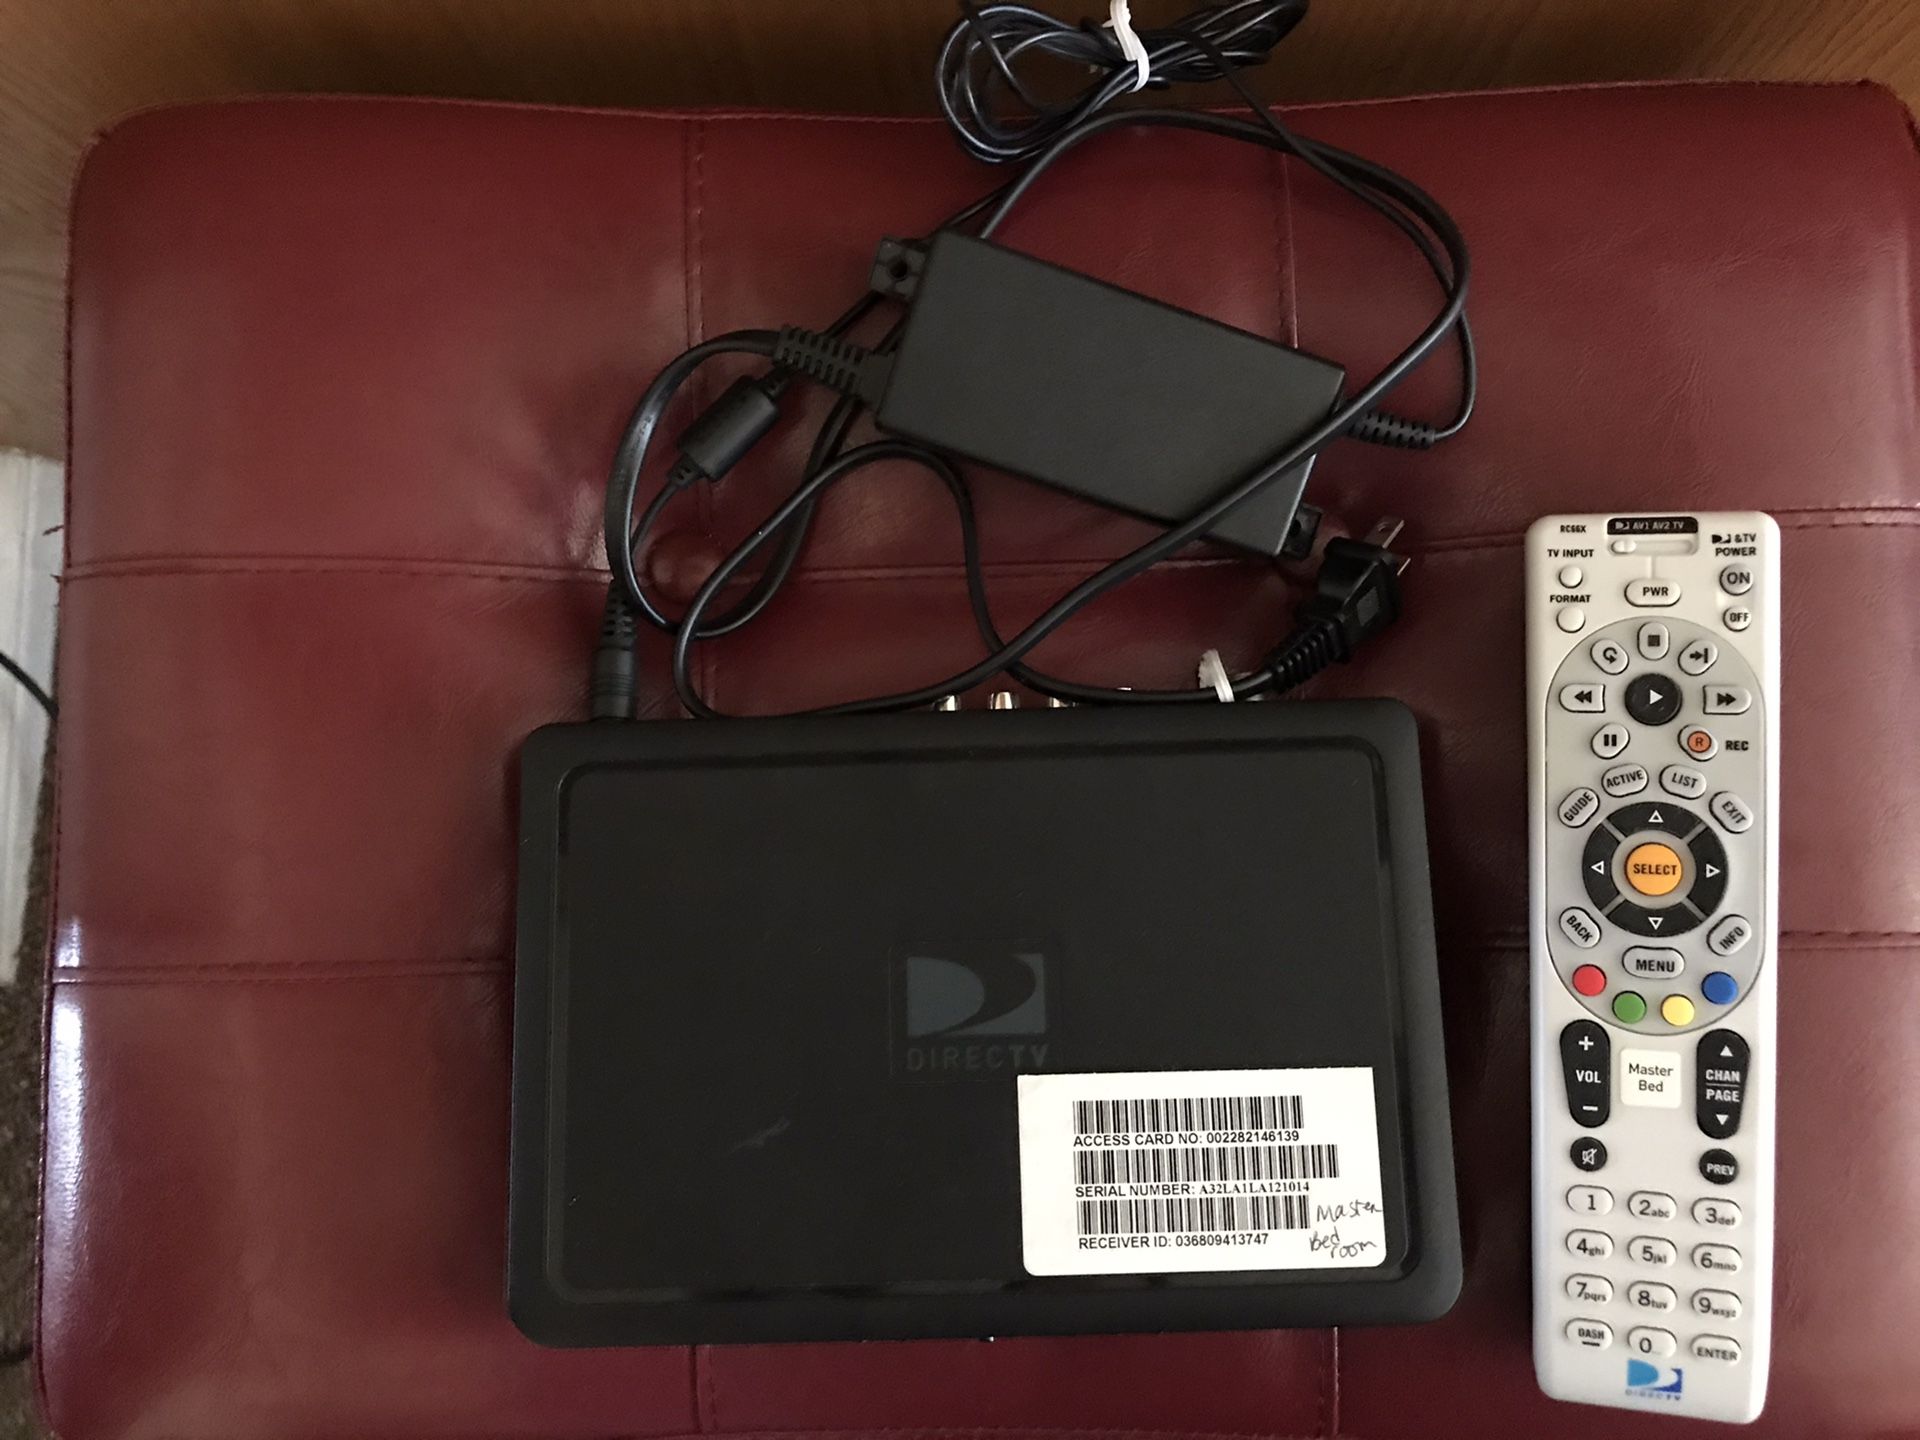 (2) direct tv boxes including remotes